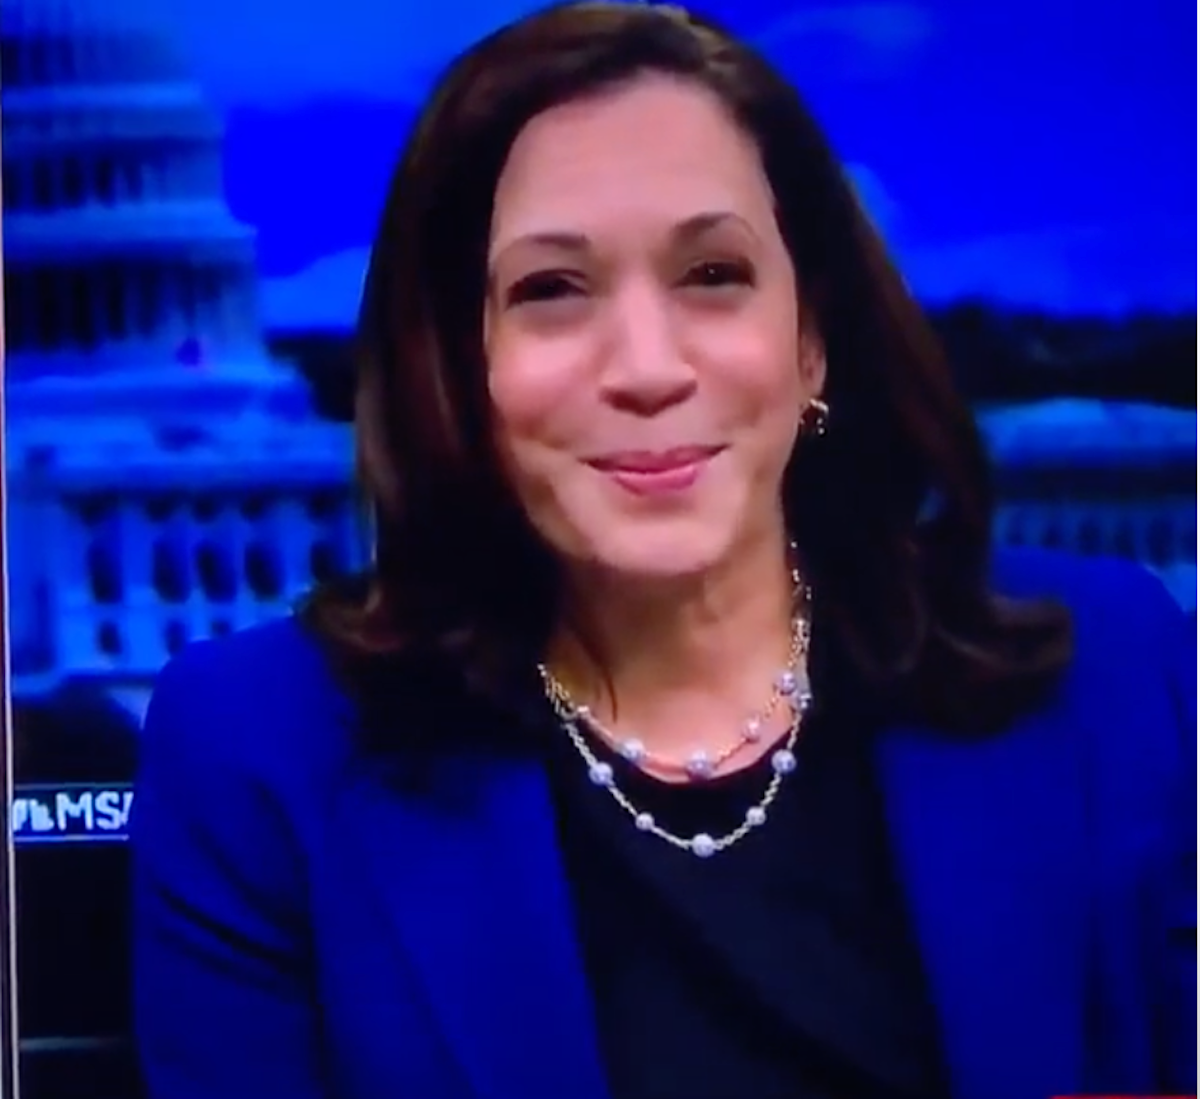 What Happened to Kamala Harris' Face? Some People Suspect Botox